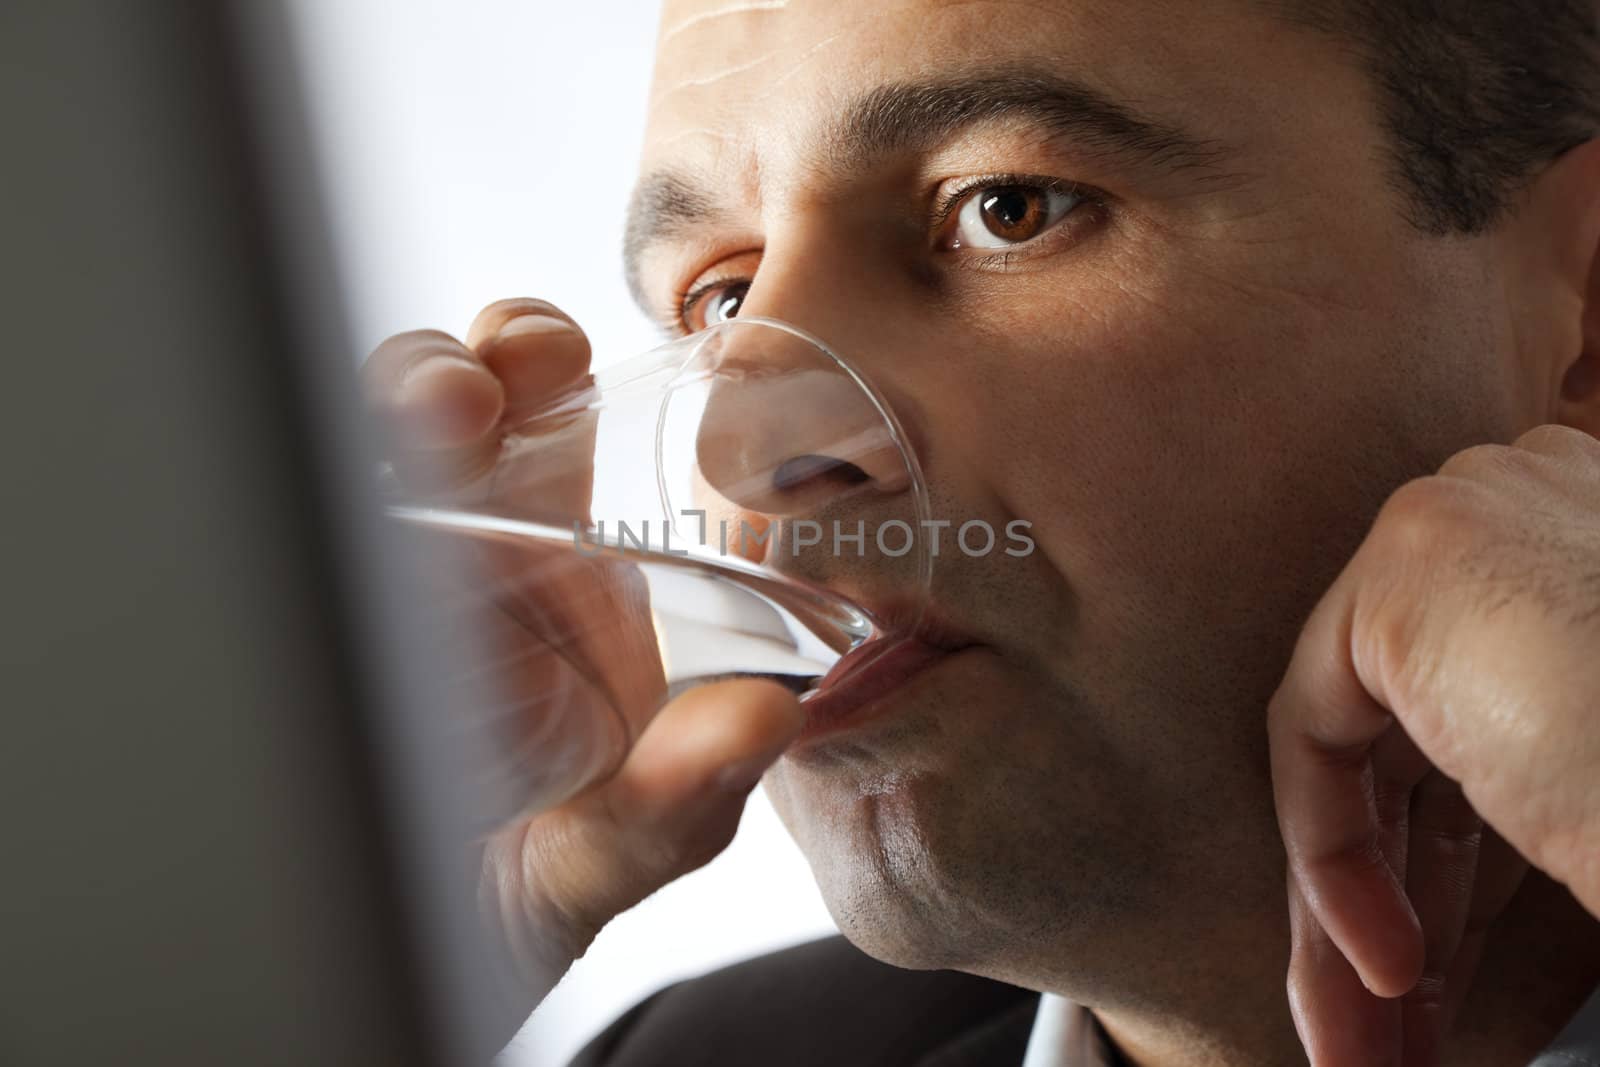 Close-up of man's face drinking water from a glass, behind laptop